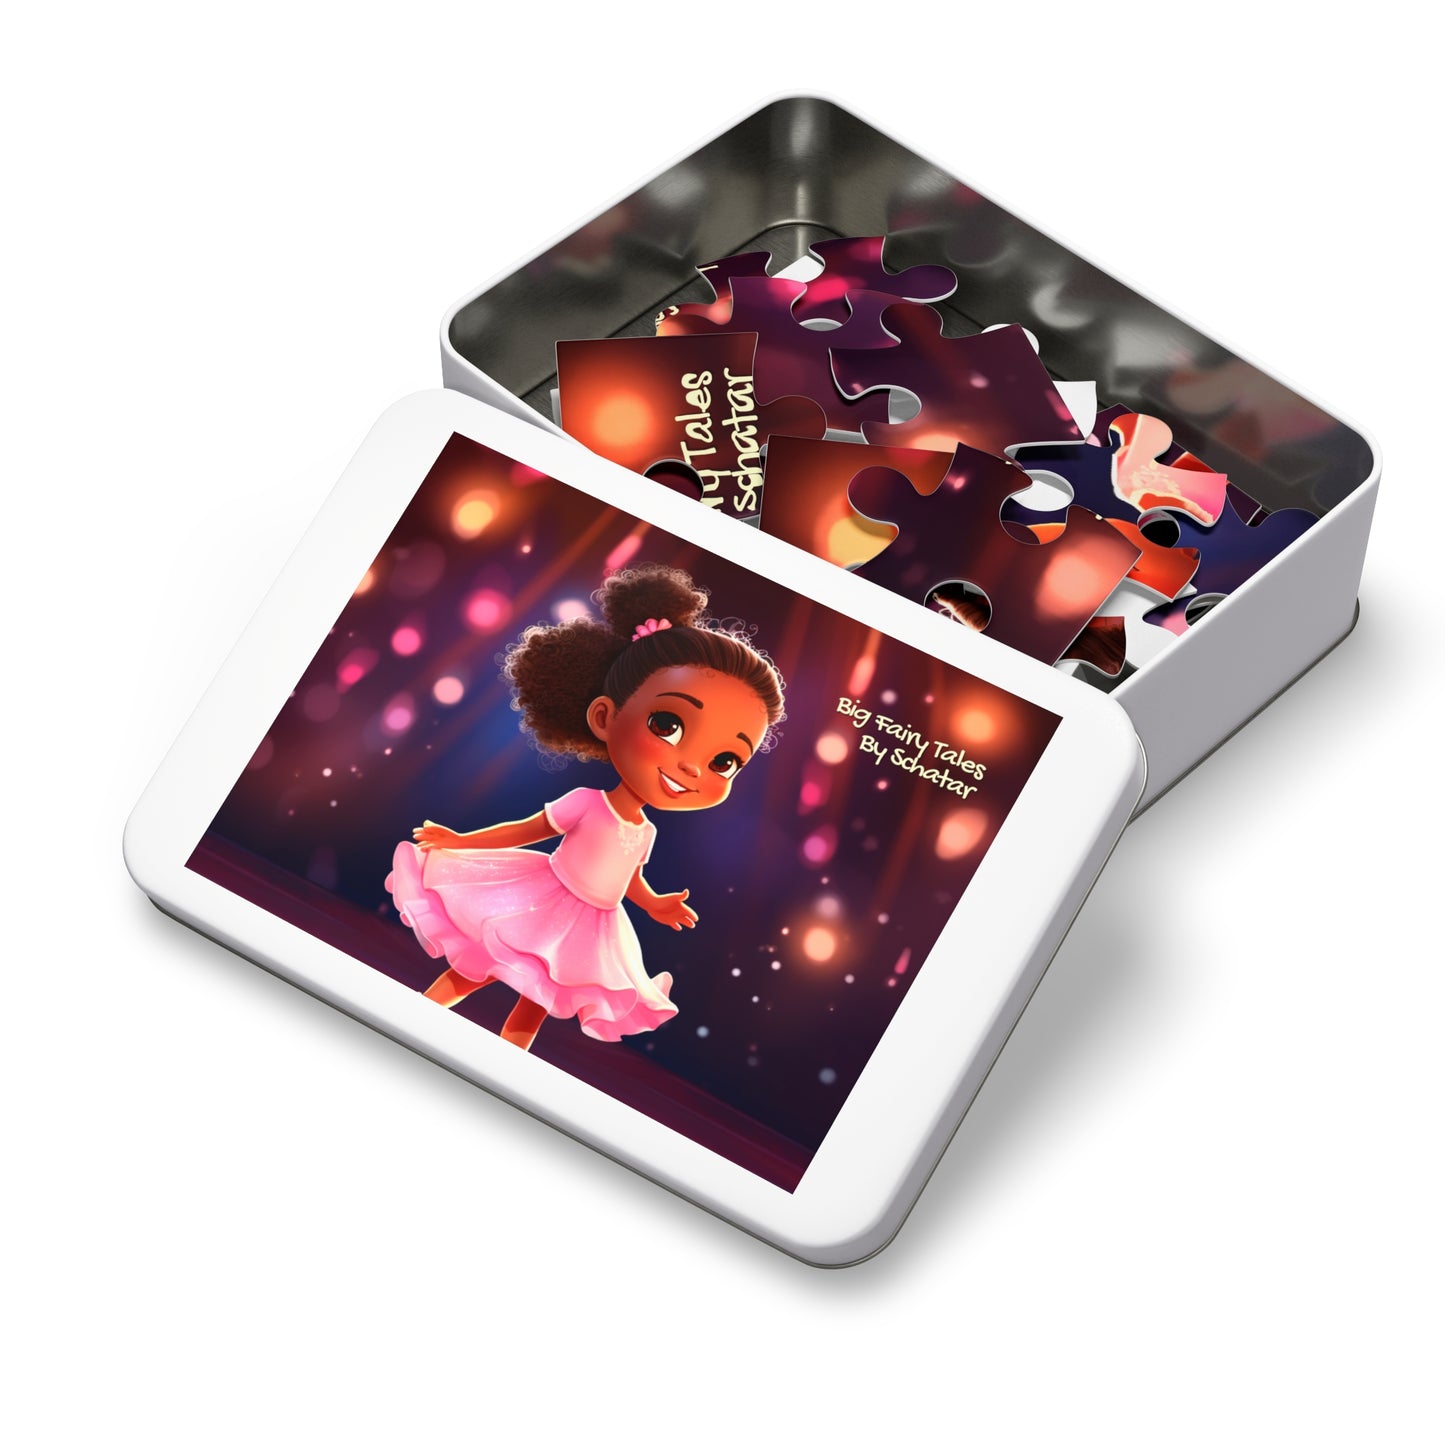 Prima Ballerina - Big Little Professionals Puzzle 3 From Big Fairy Tales By Schatar